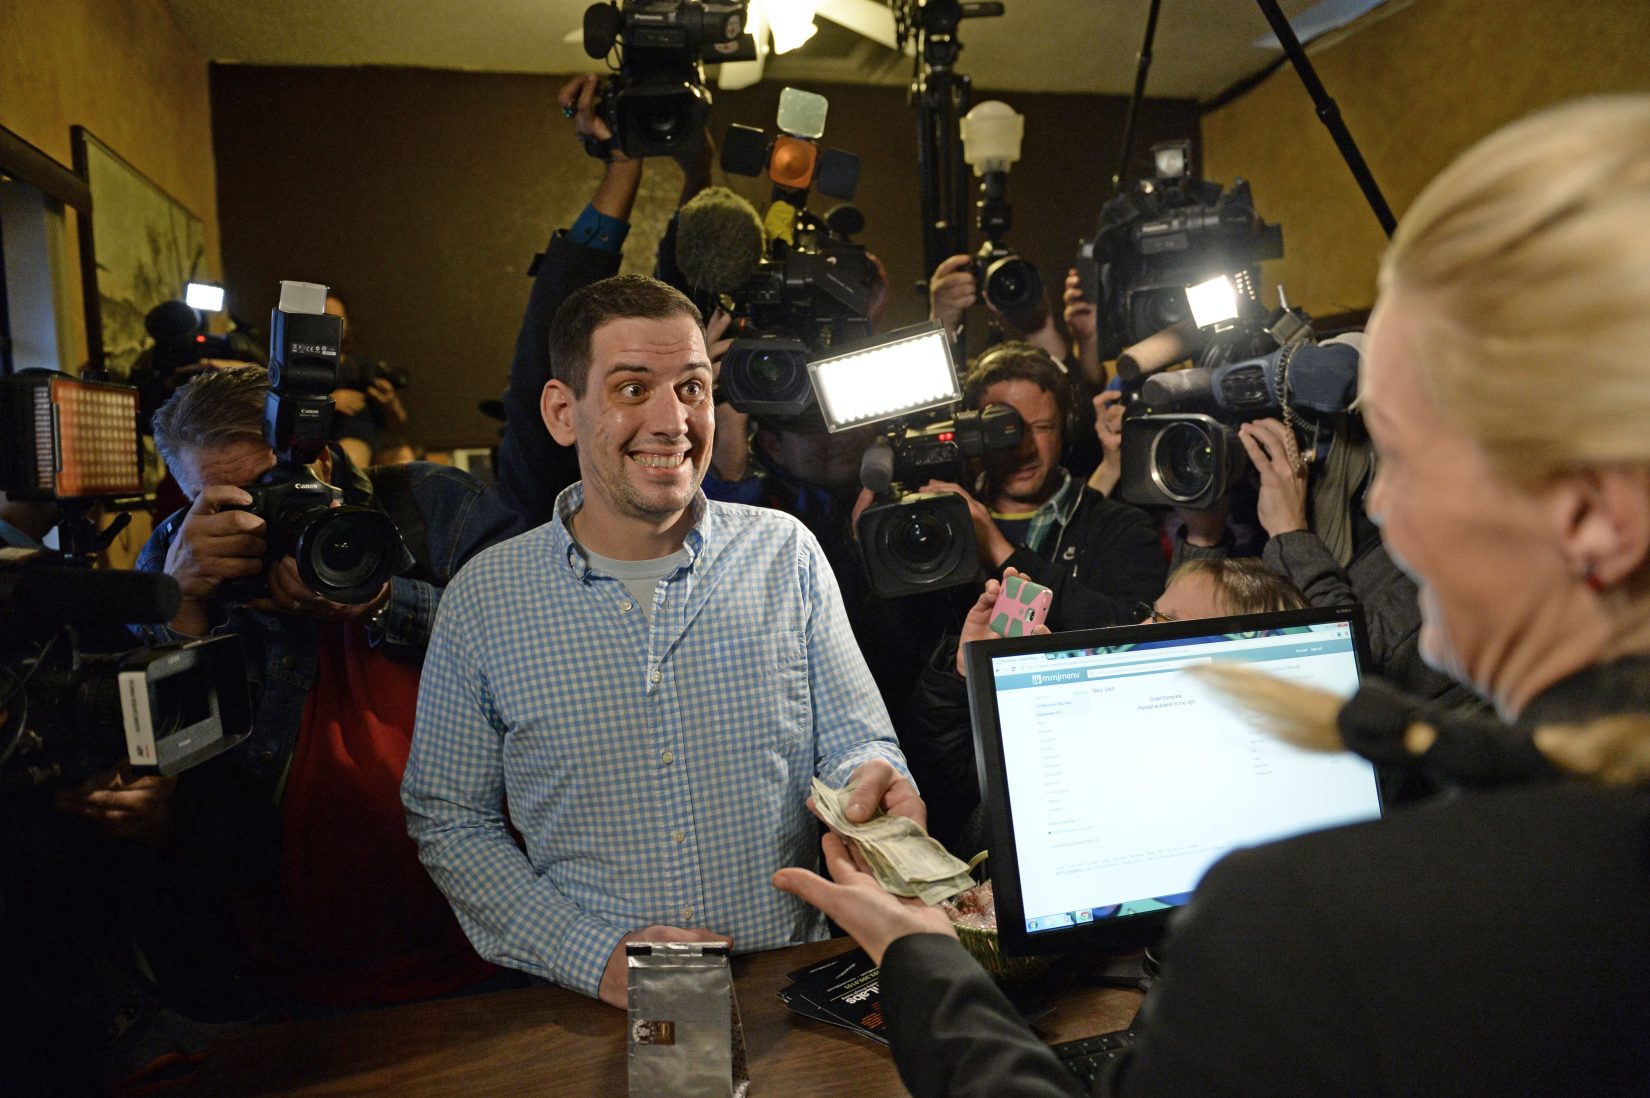 Looking back at the first month of legal recreational marijuana sales in Colroado, the look on Sean Azzariti's face says it all. (Azzariti is an Iraq war veteran who suffers from post-traumatic stress disorder and made the first purchase of recreational marijuana at 3D Cannabis Center on Jan. 1.)